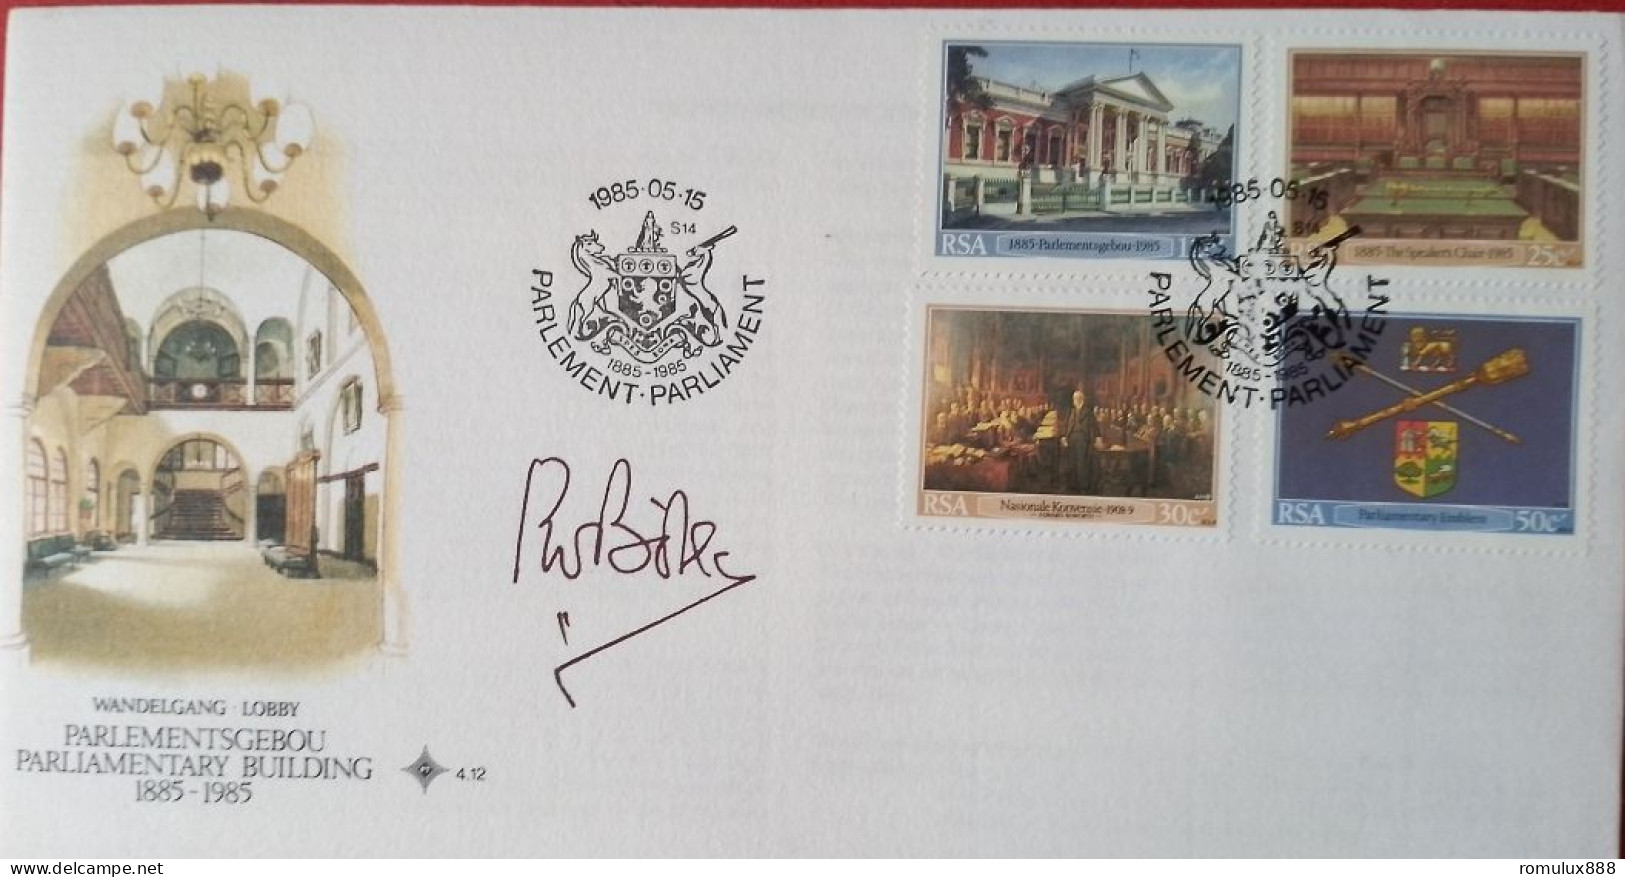 PW BOTHA SIGNED FDC #4.12 PARLIMENT BUILDINGS - Covers & Documents